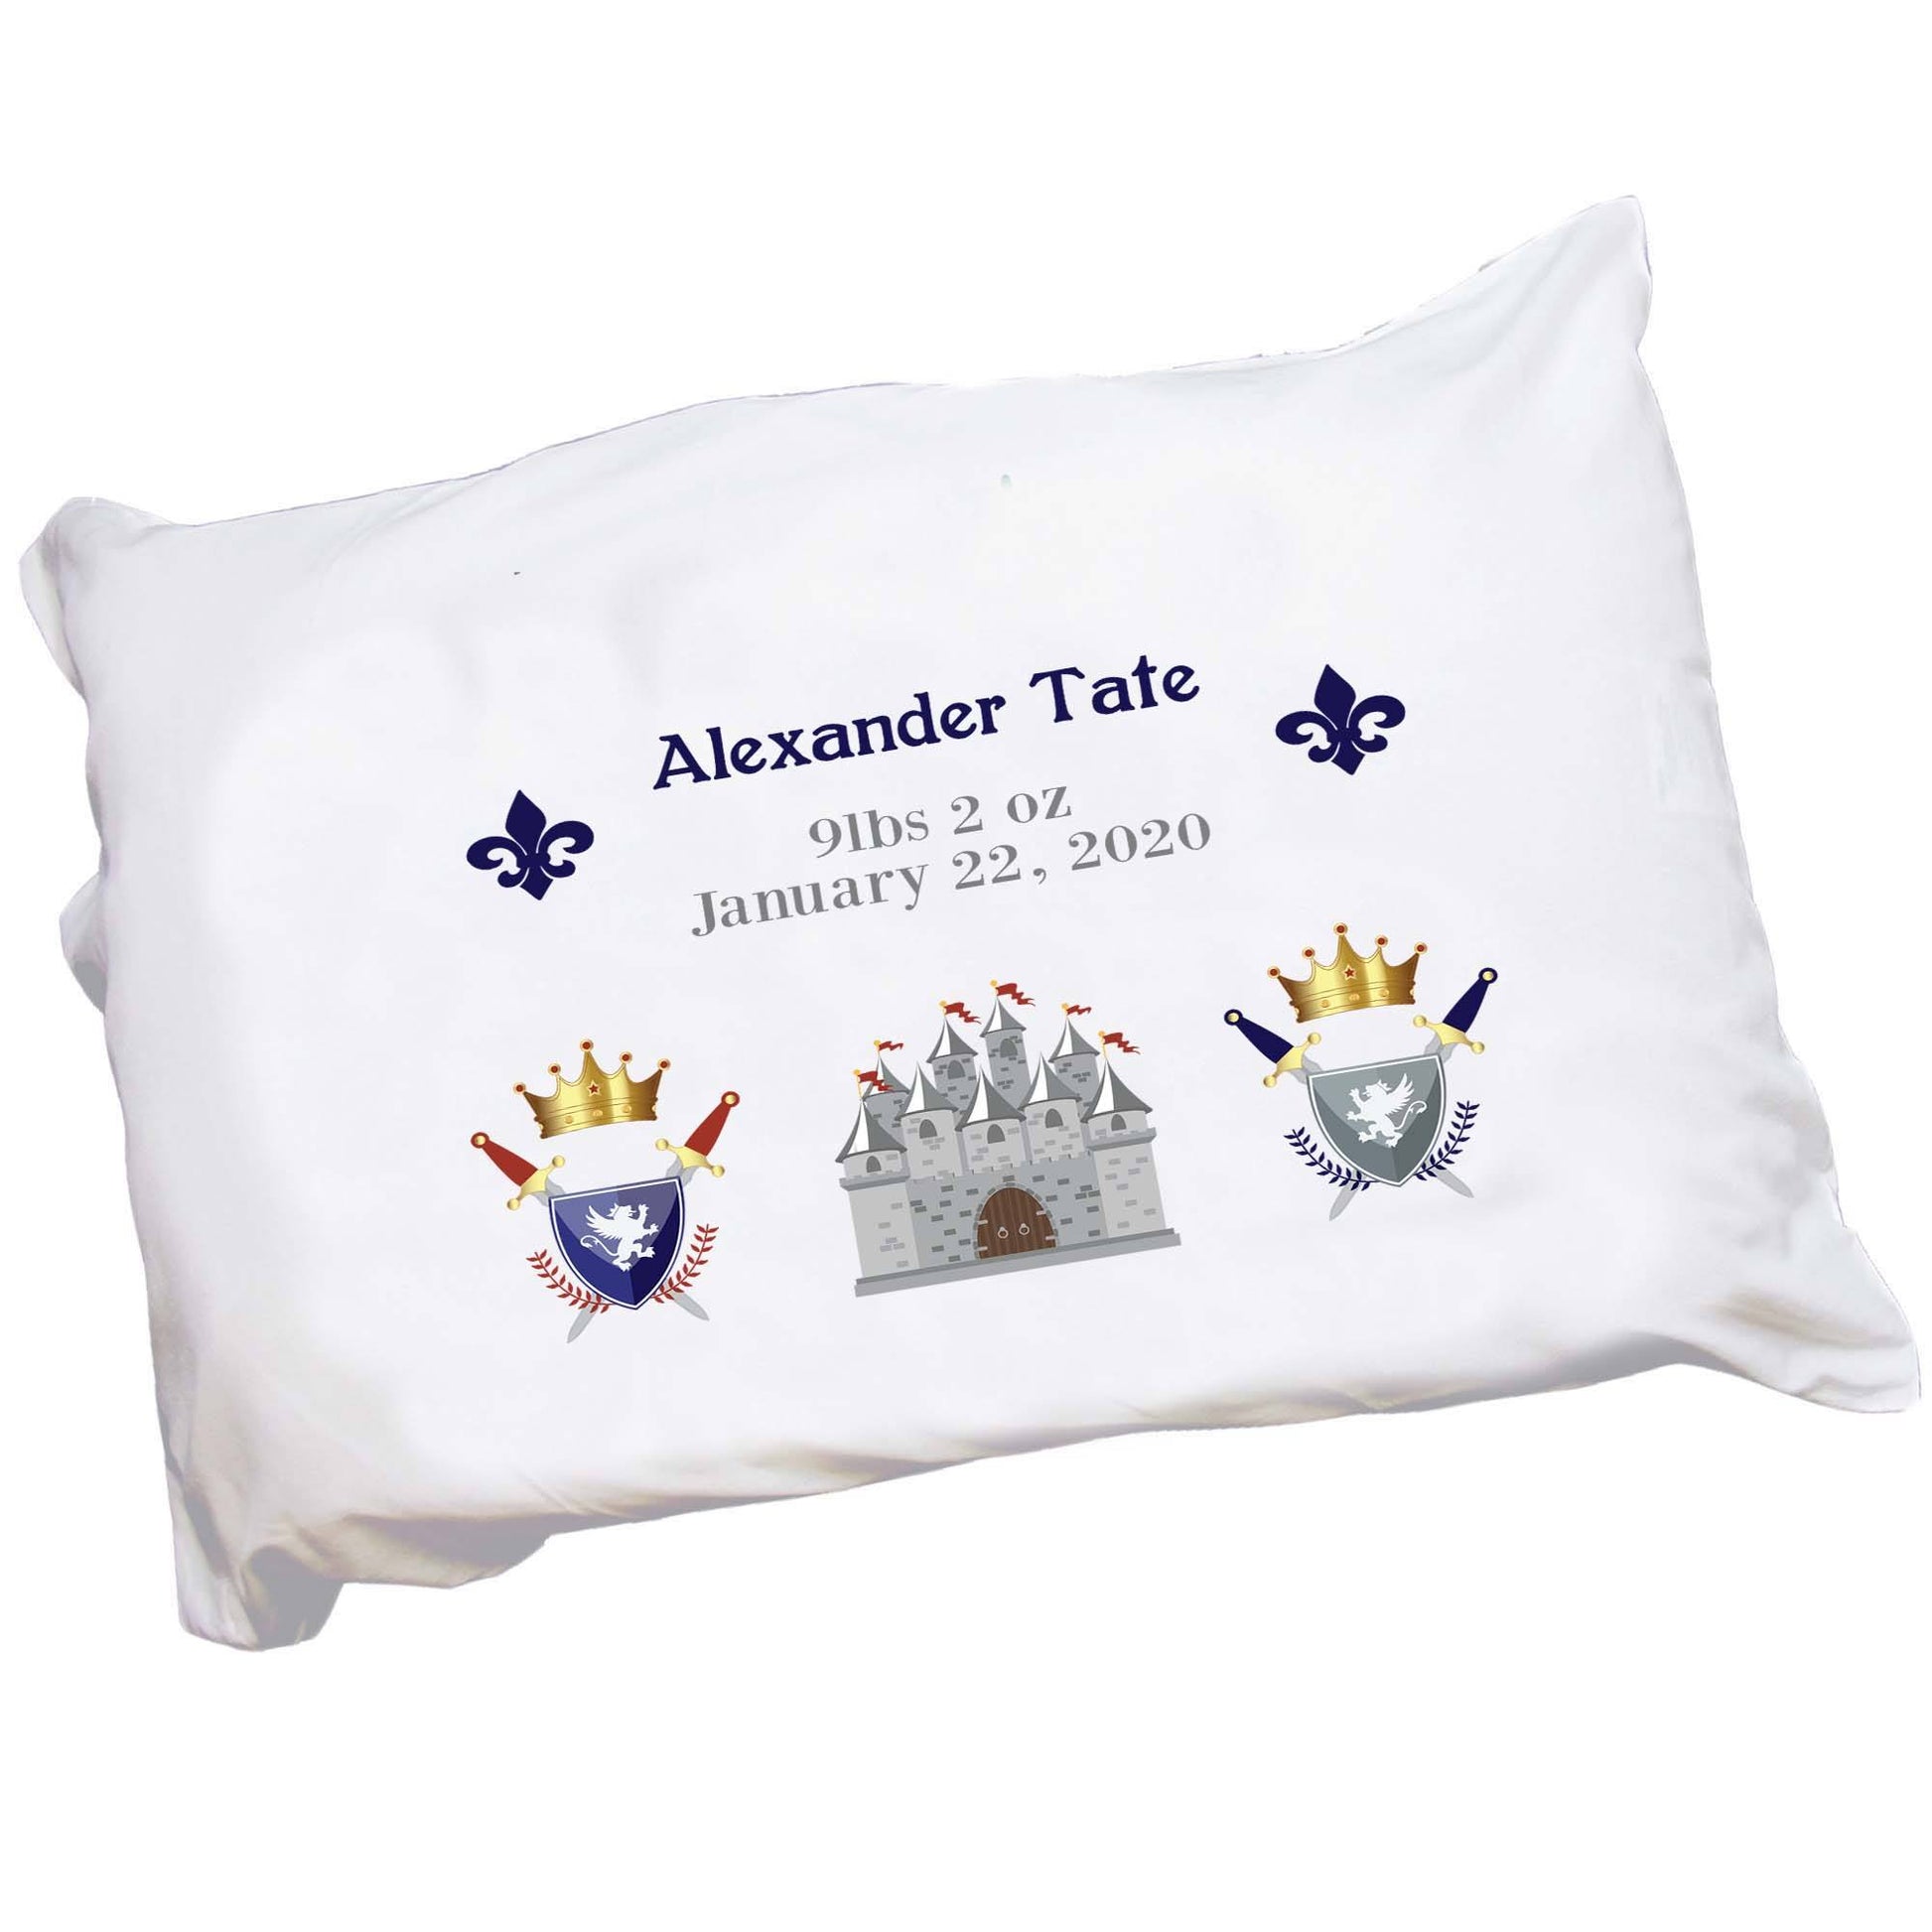 Personalized Childrens Pillowcase with Medieval Castle design